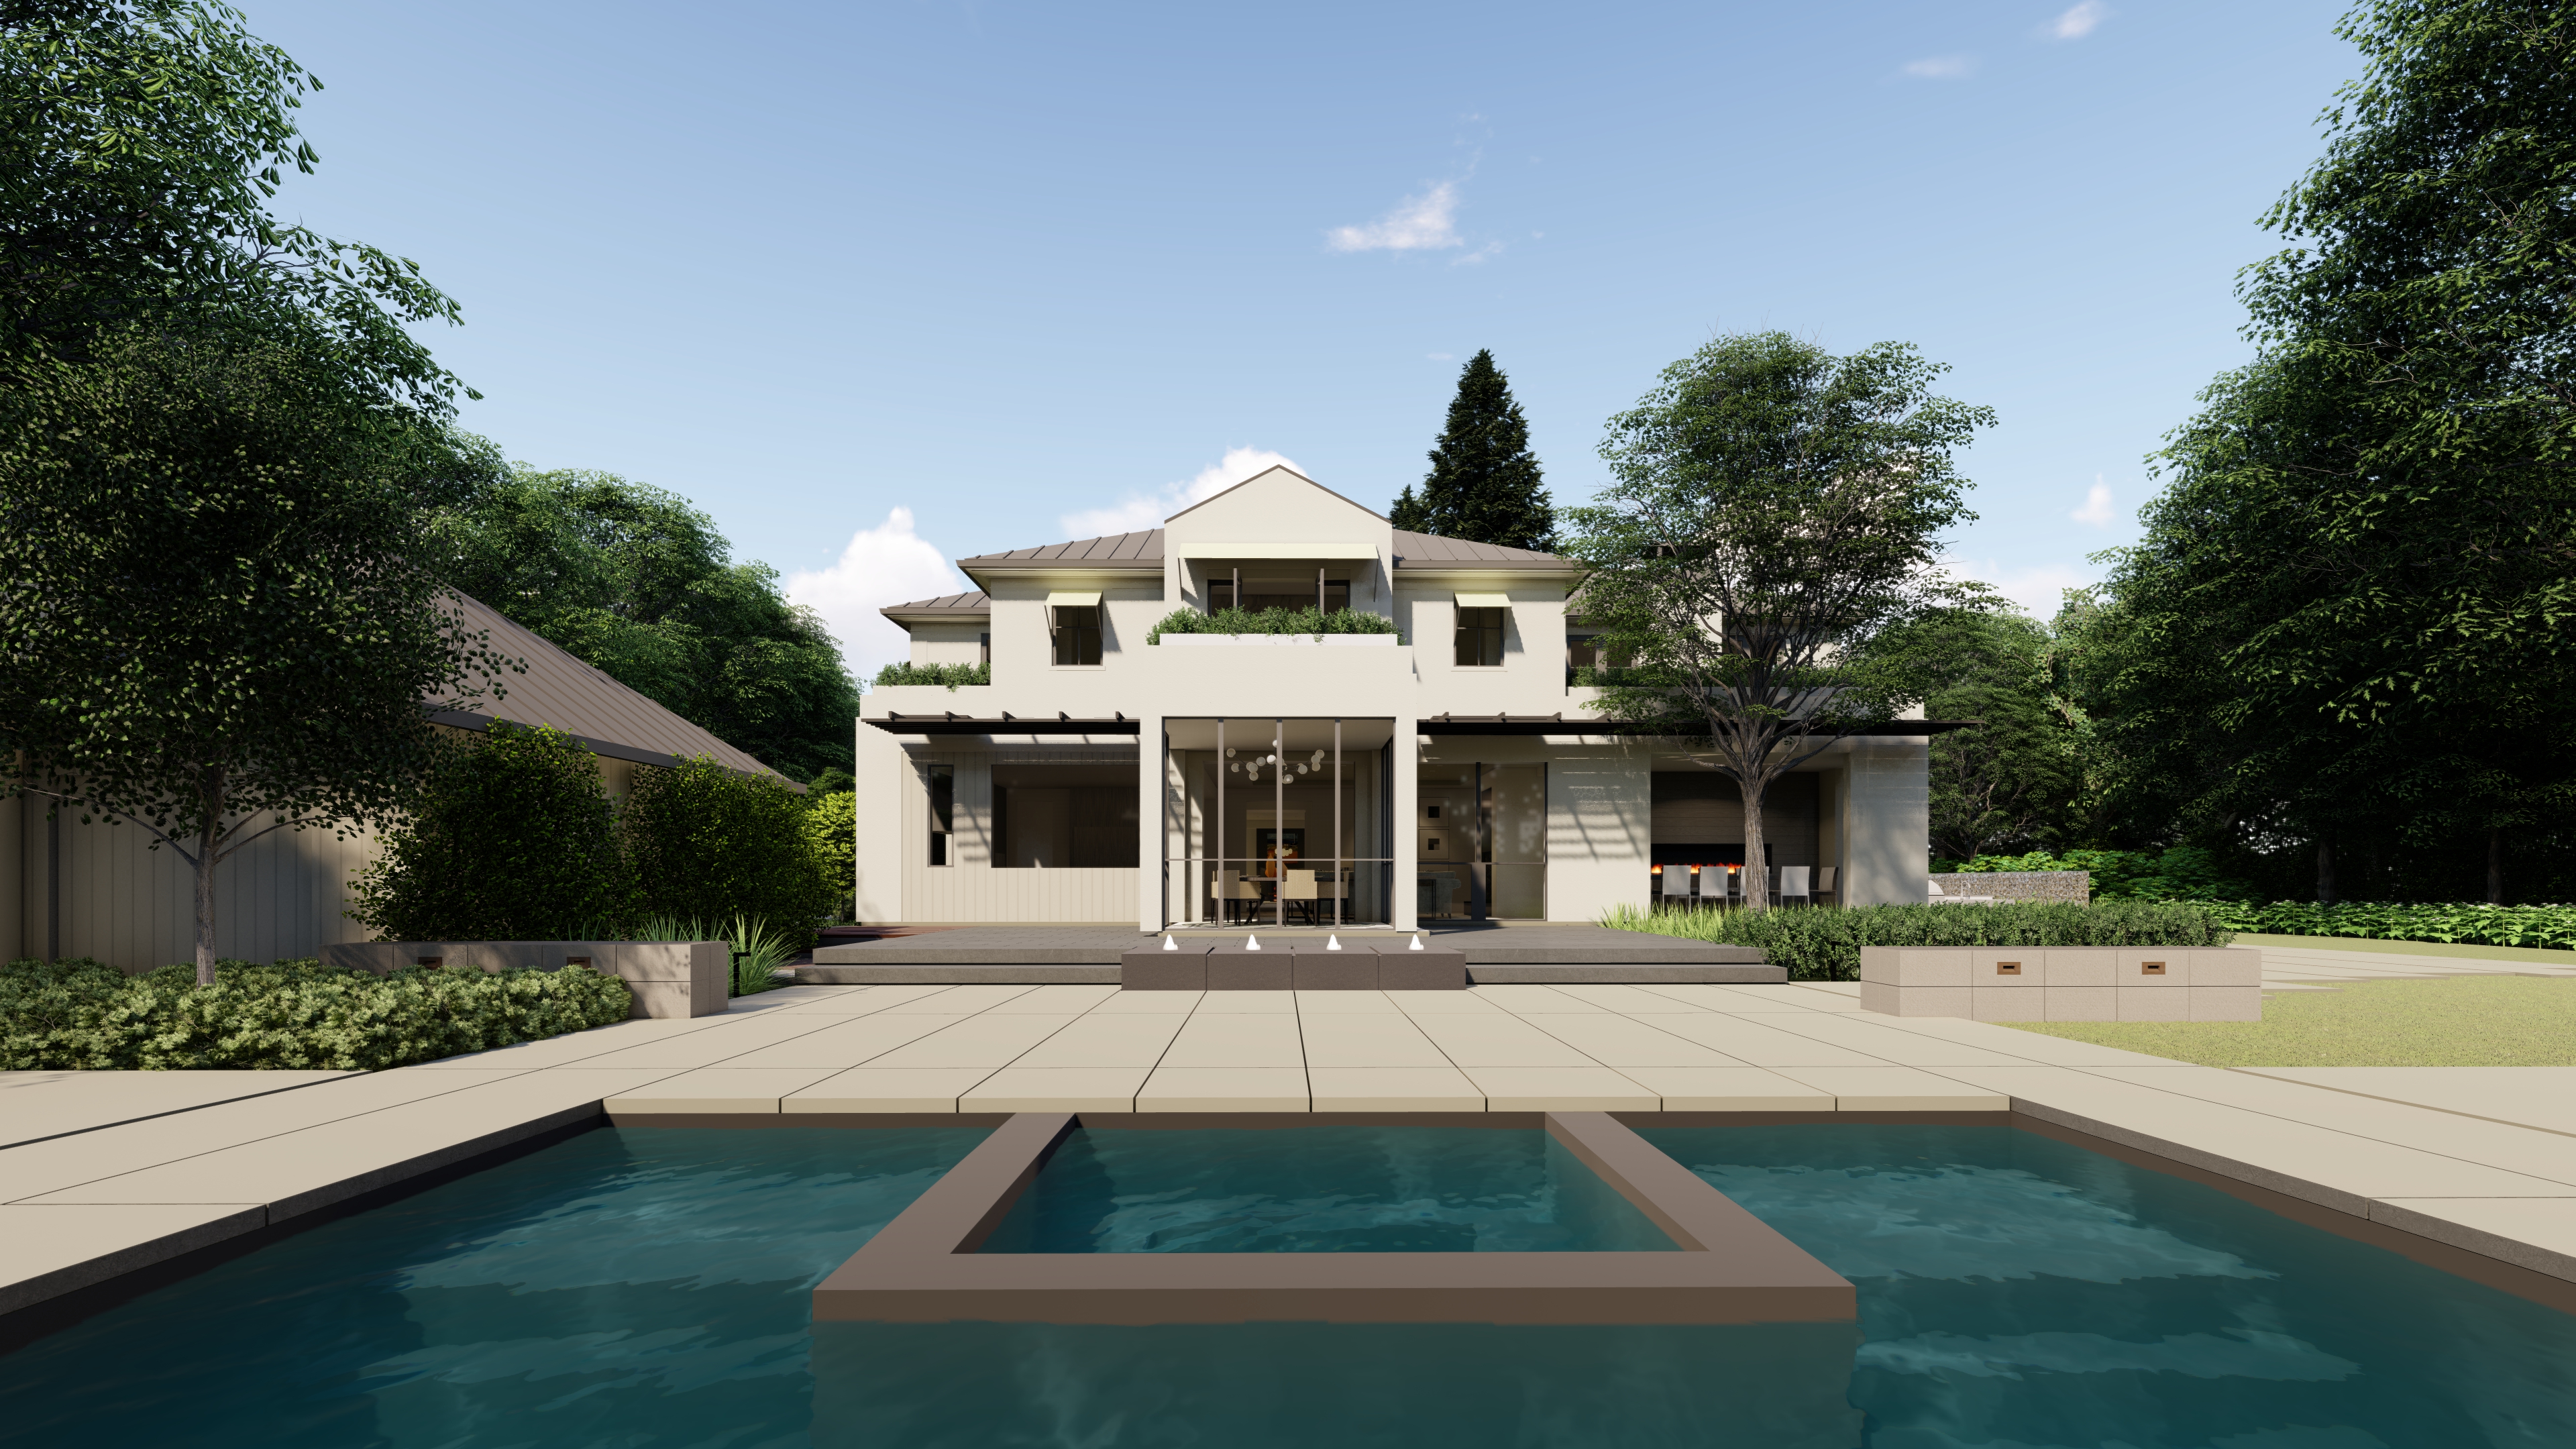 An architectural rendering of Curry's now former $31 million home